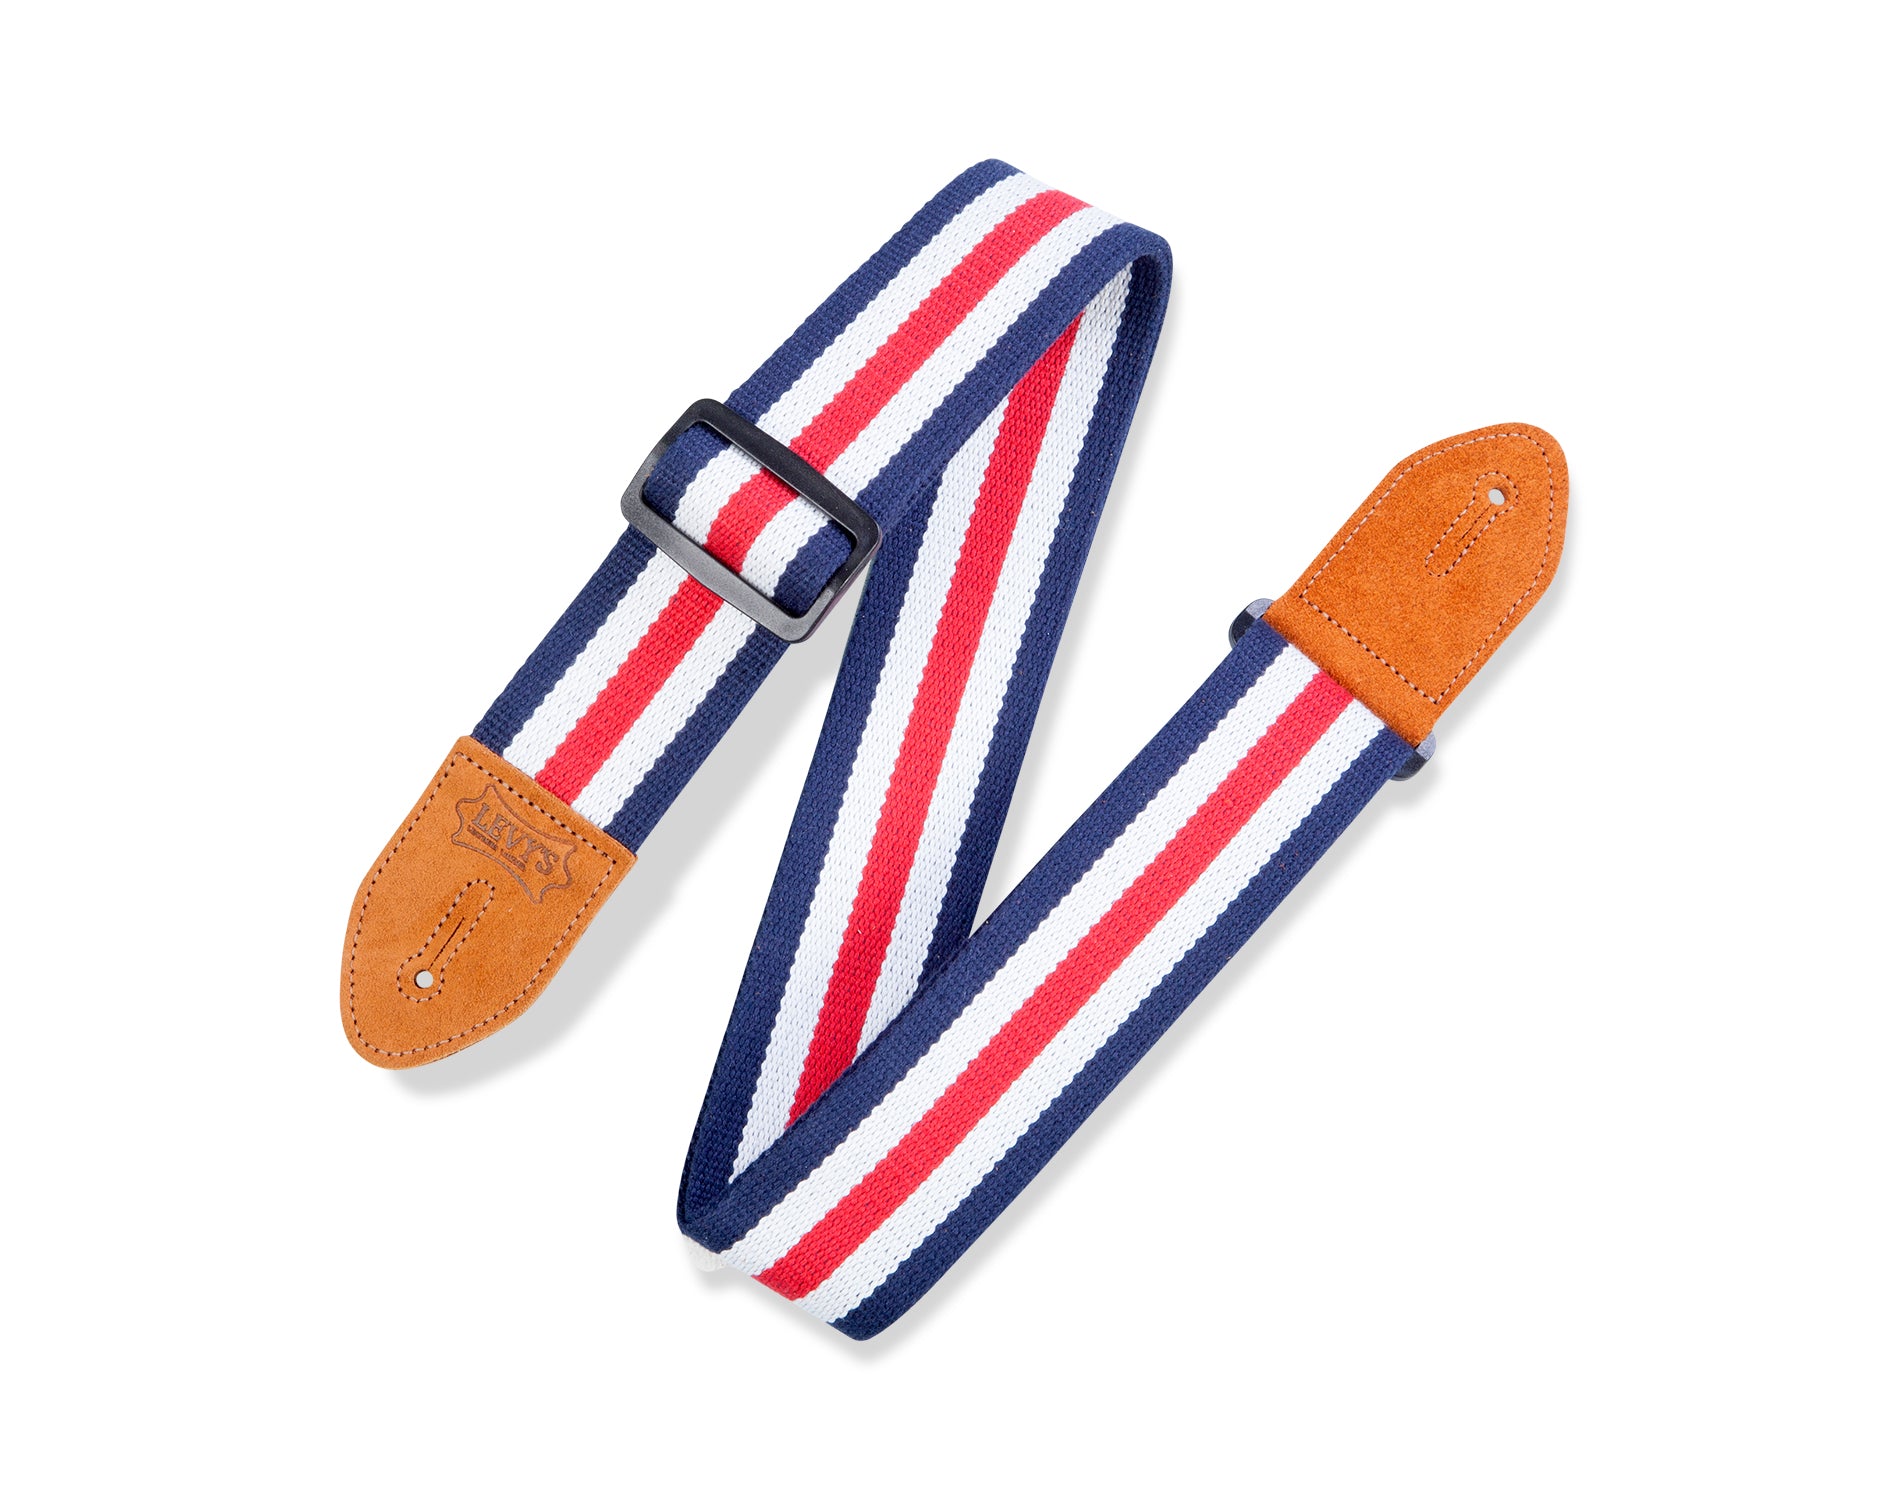 Levy's, 2" Cotton Guitar Strap                                                                                                                                                                                                                                                                                                                                                                     Color Available: Red, White And Blue Stripe,  Black, White And Green Stripe